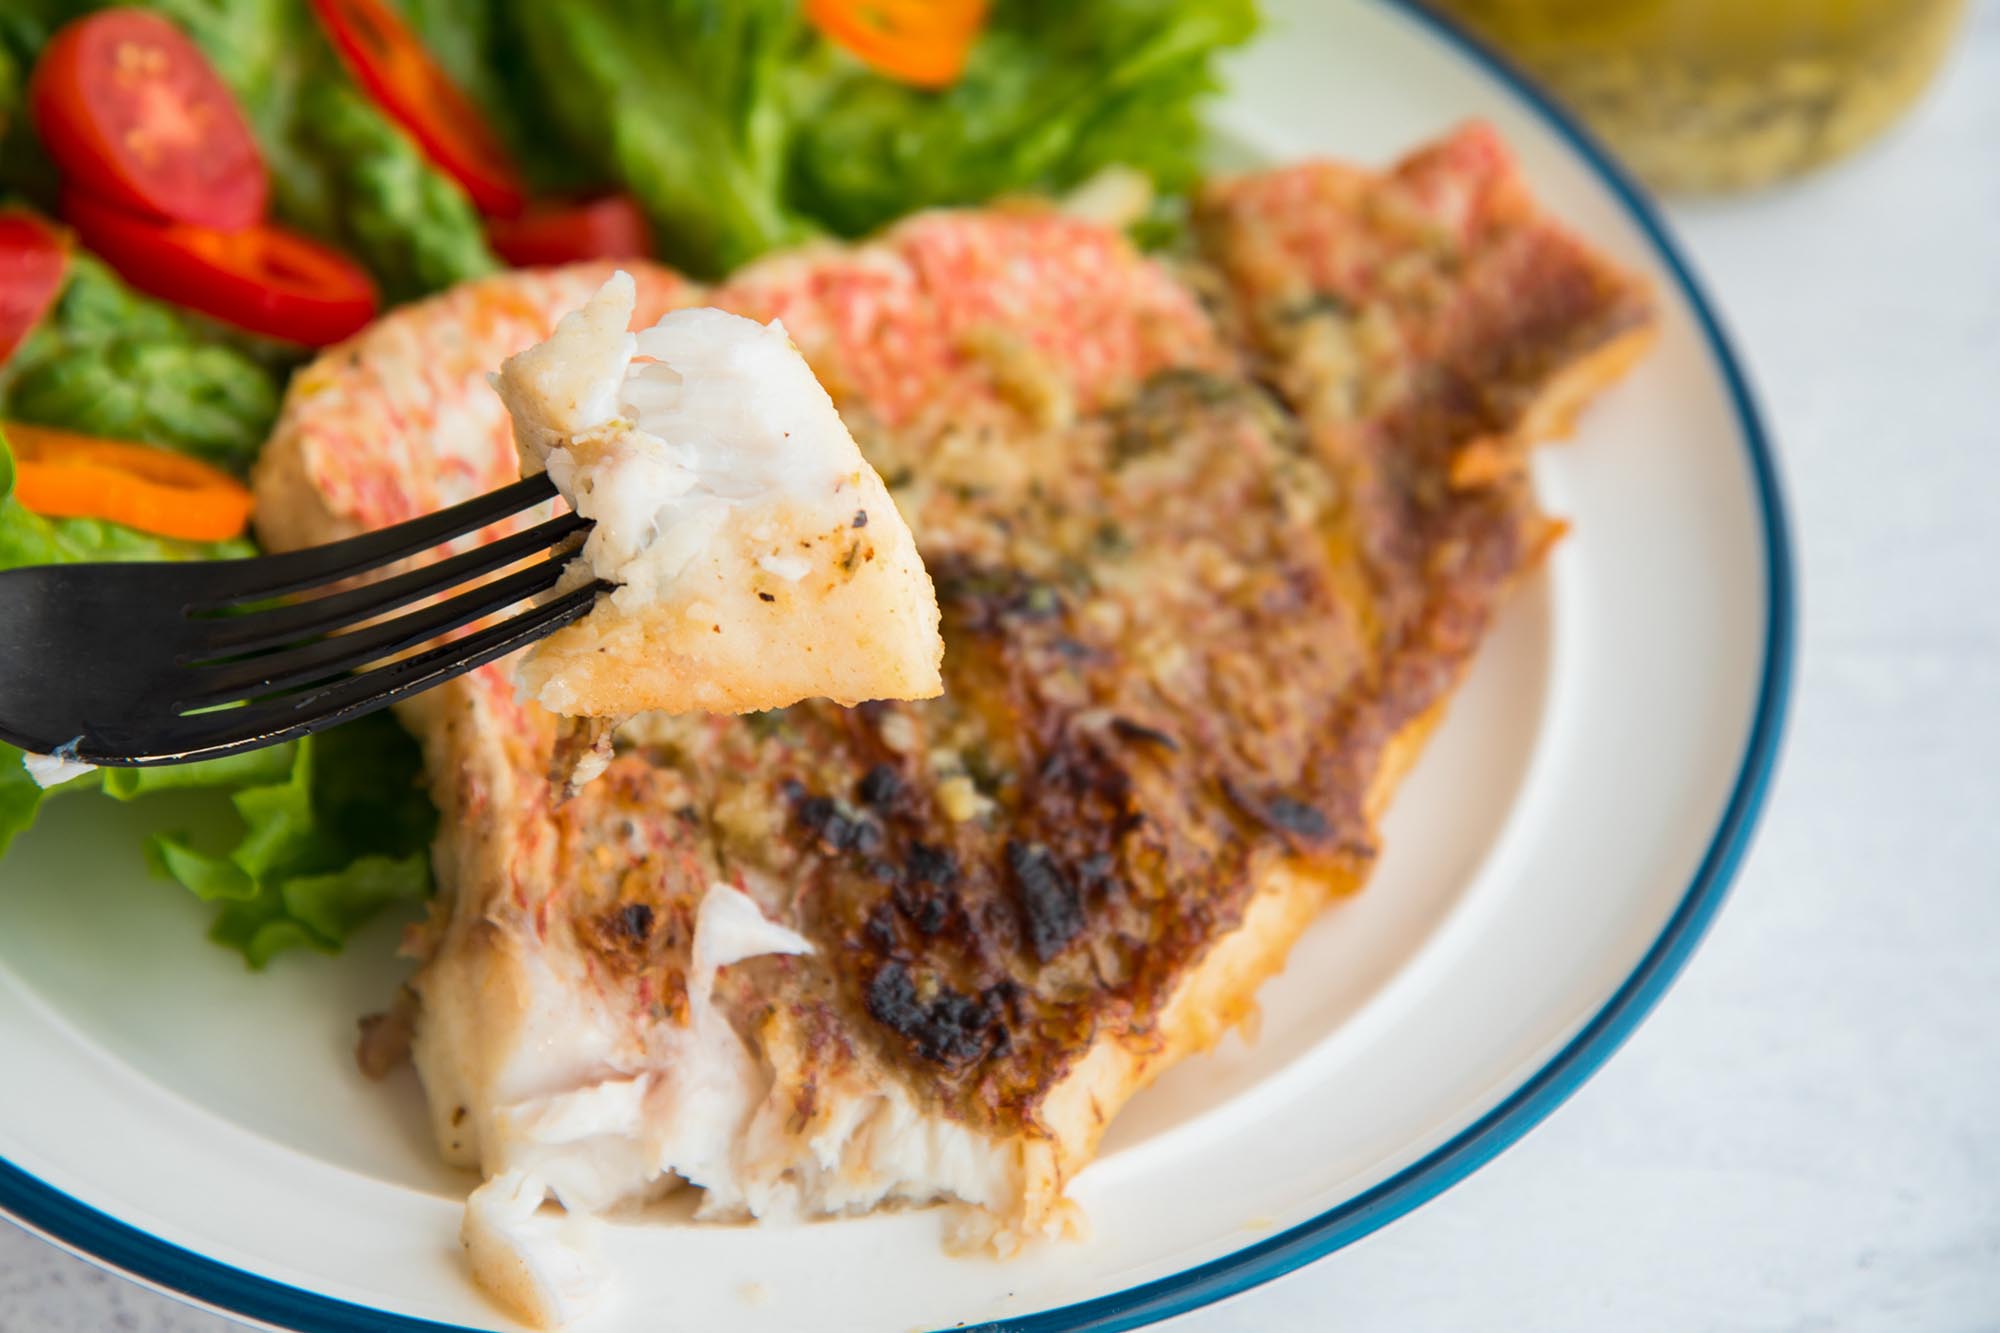 Homemade red snapper is on a white plate with a blue strip around it. A fork is holding a piece of the fillet and a green salad with red and orange peppers is on the plate behind the lenten fish with garlic sauce.